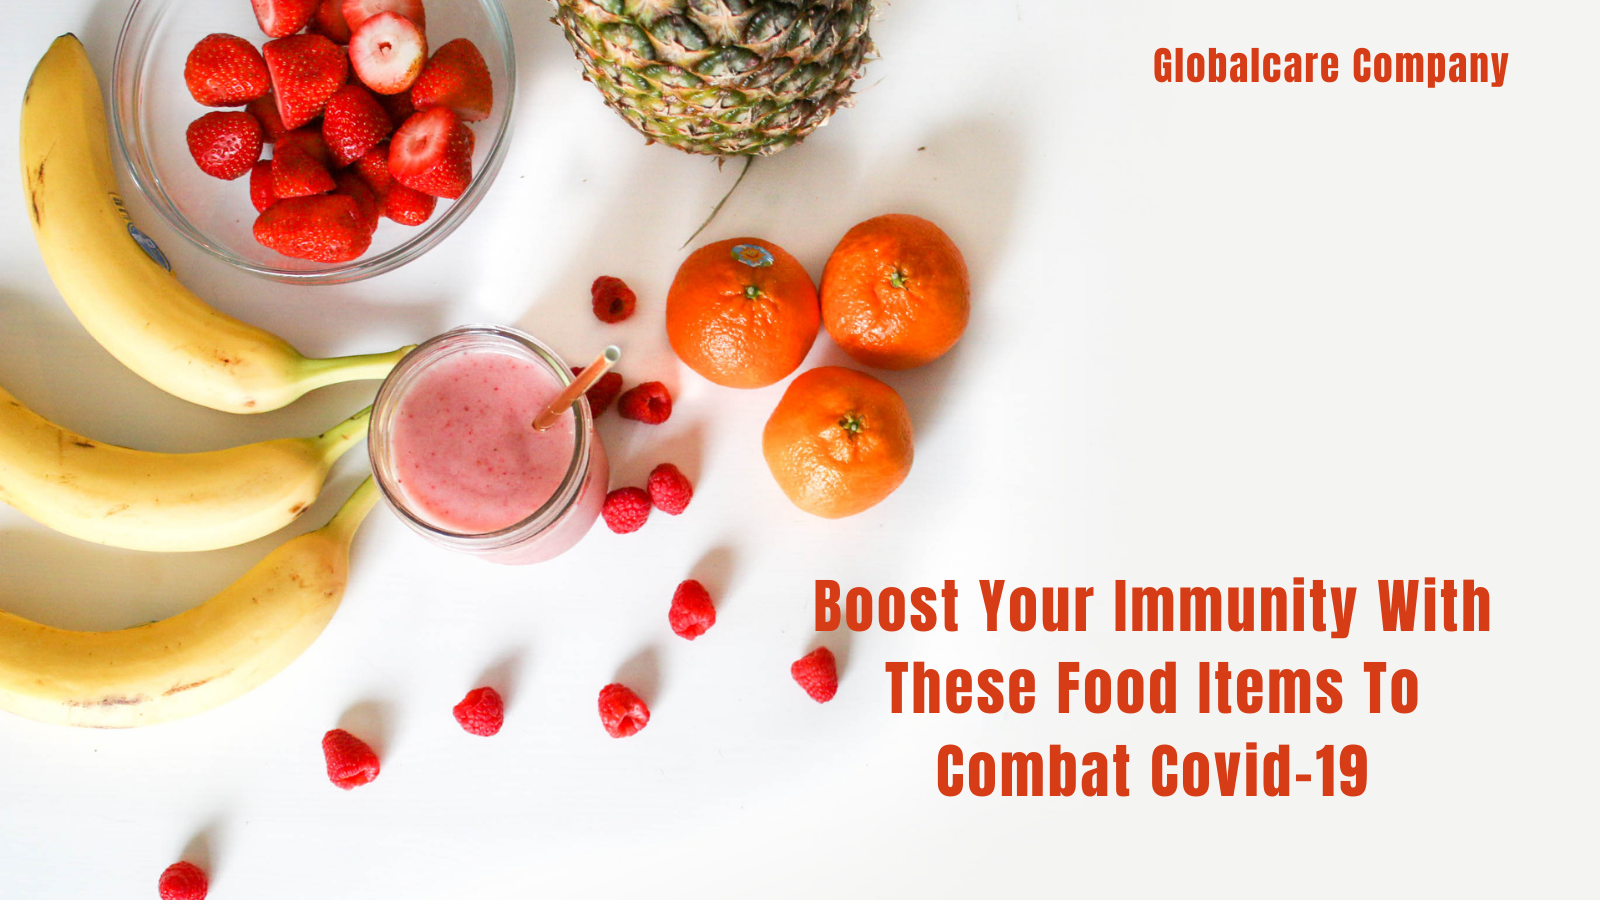 Boost Your Immunity With These Food Items To Combat Covid-19